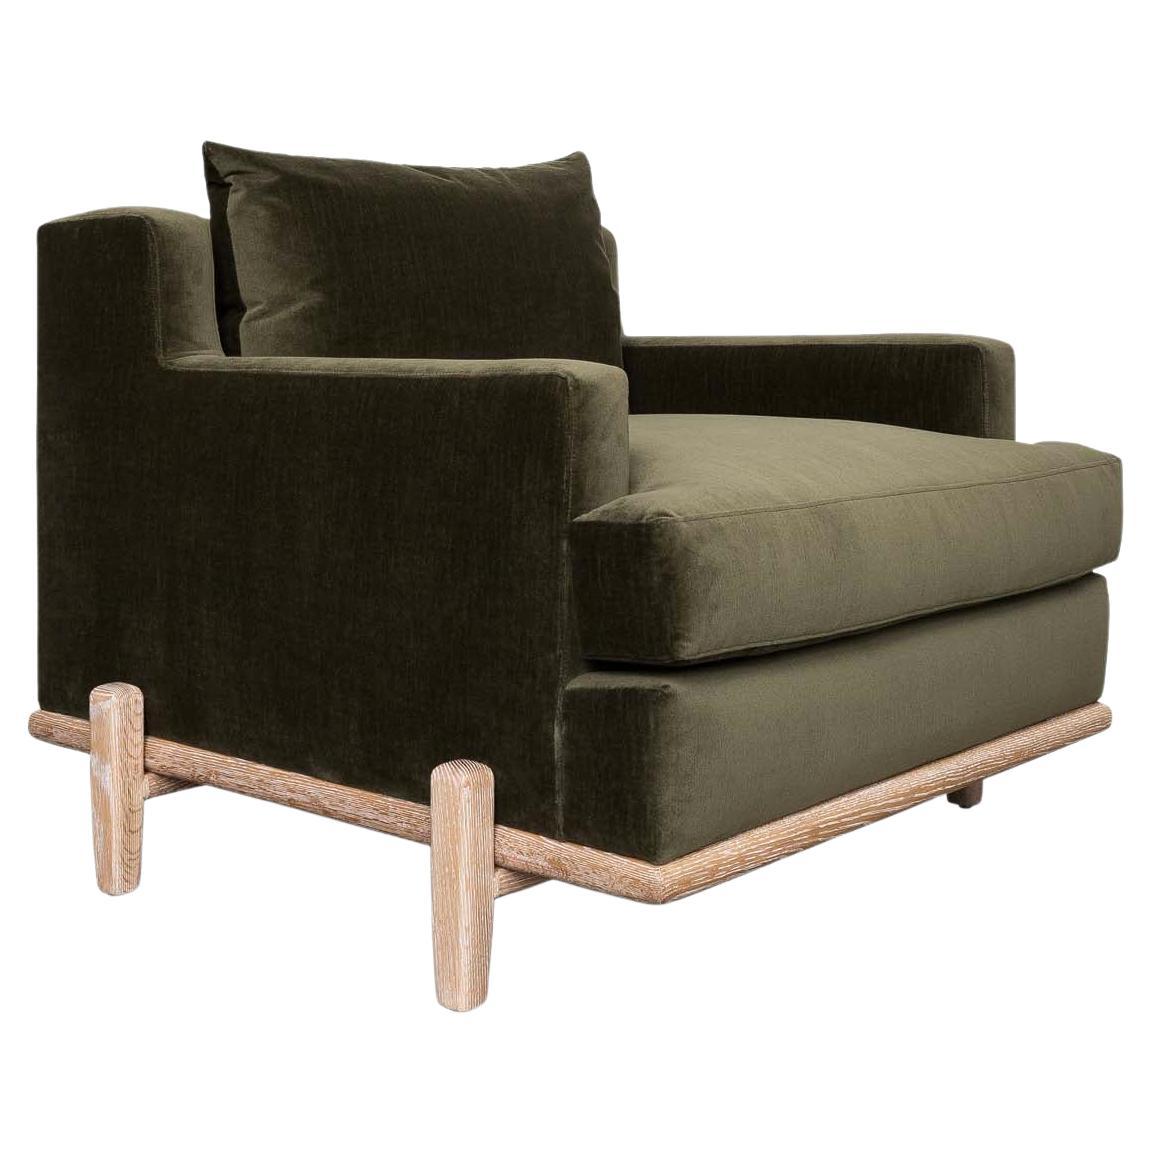 The George chair is part of the collaborative collection with interior designer Brian Paquette. The George Chair is a low profile, but wide-scale lounge chair that rests on top of a solid wood base. This piece is available in exclusive BP for LF